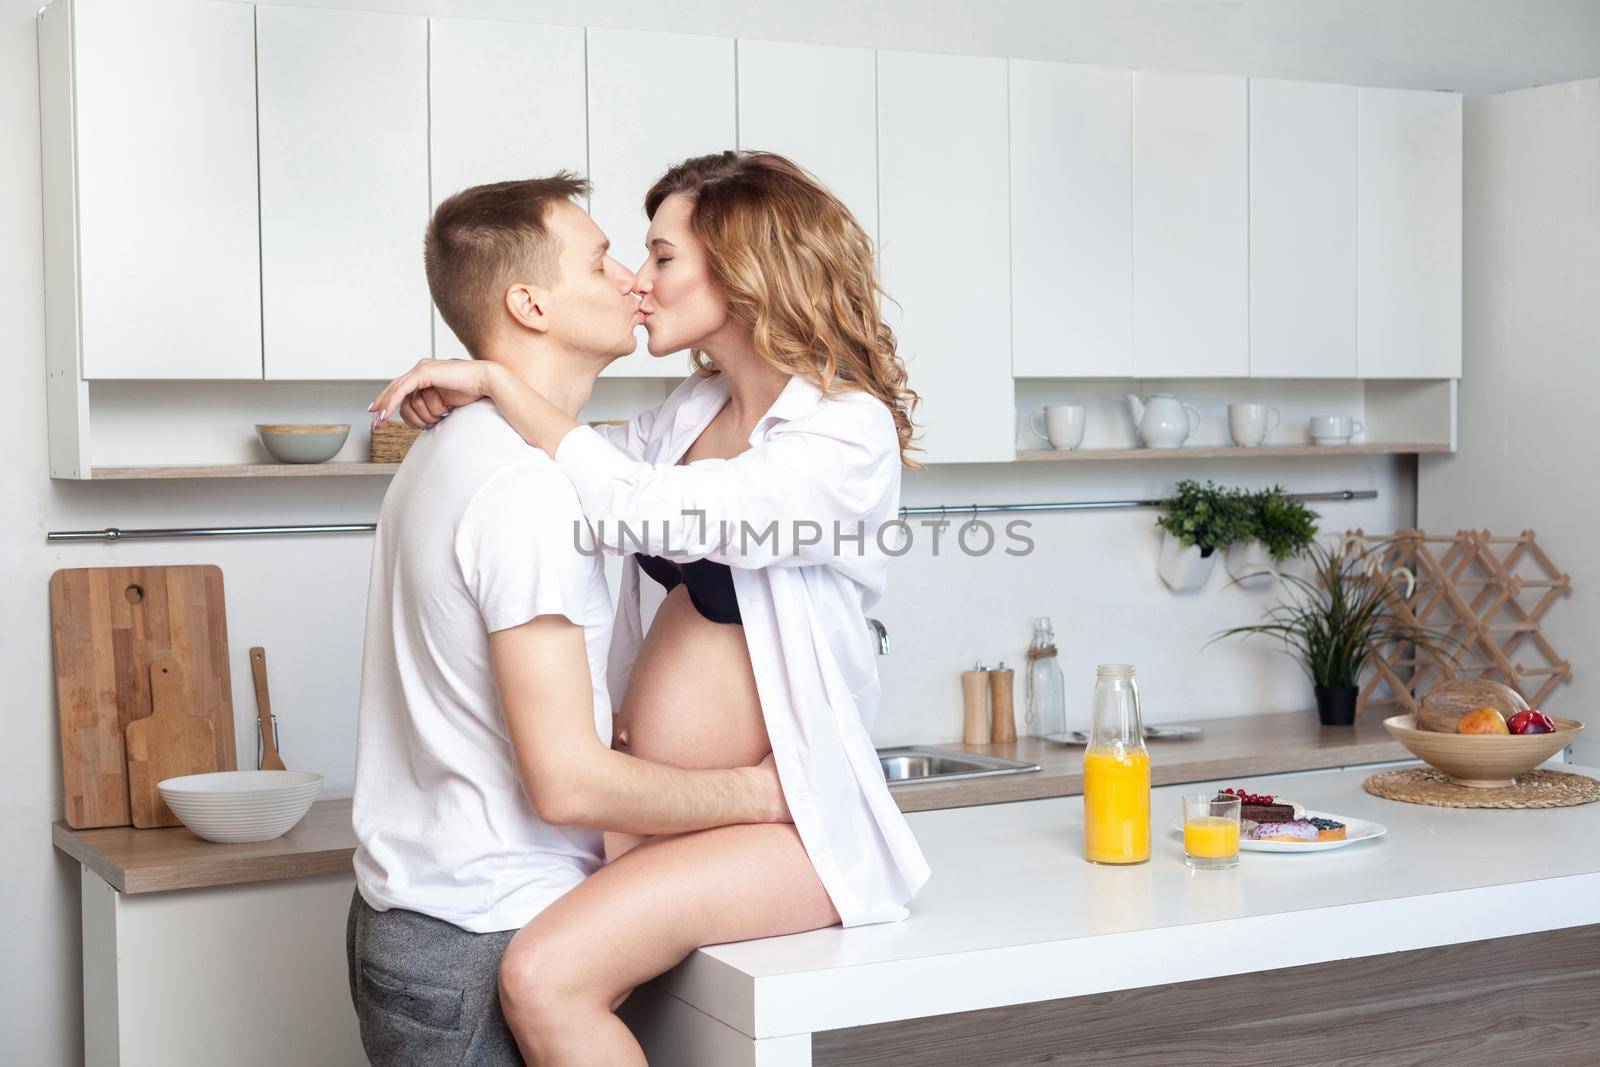 Lovestory. Young married couple embraces siting on table in kitchen. Husband hugs his pregnant wife, putting his hands on her big belly, parents enjoy each other and kissing with closed eyes.